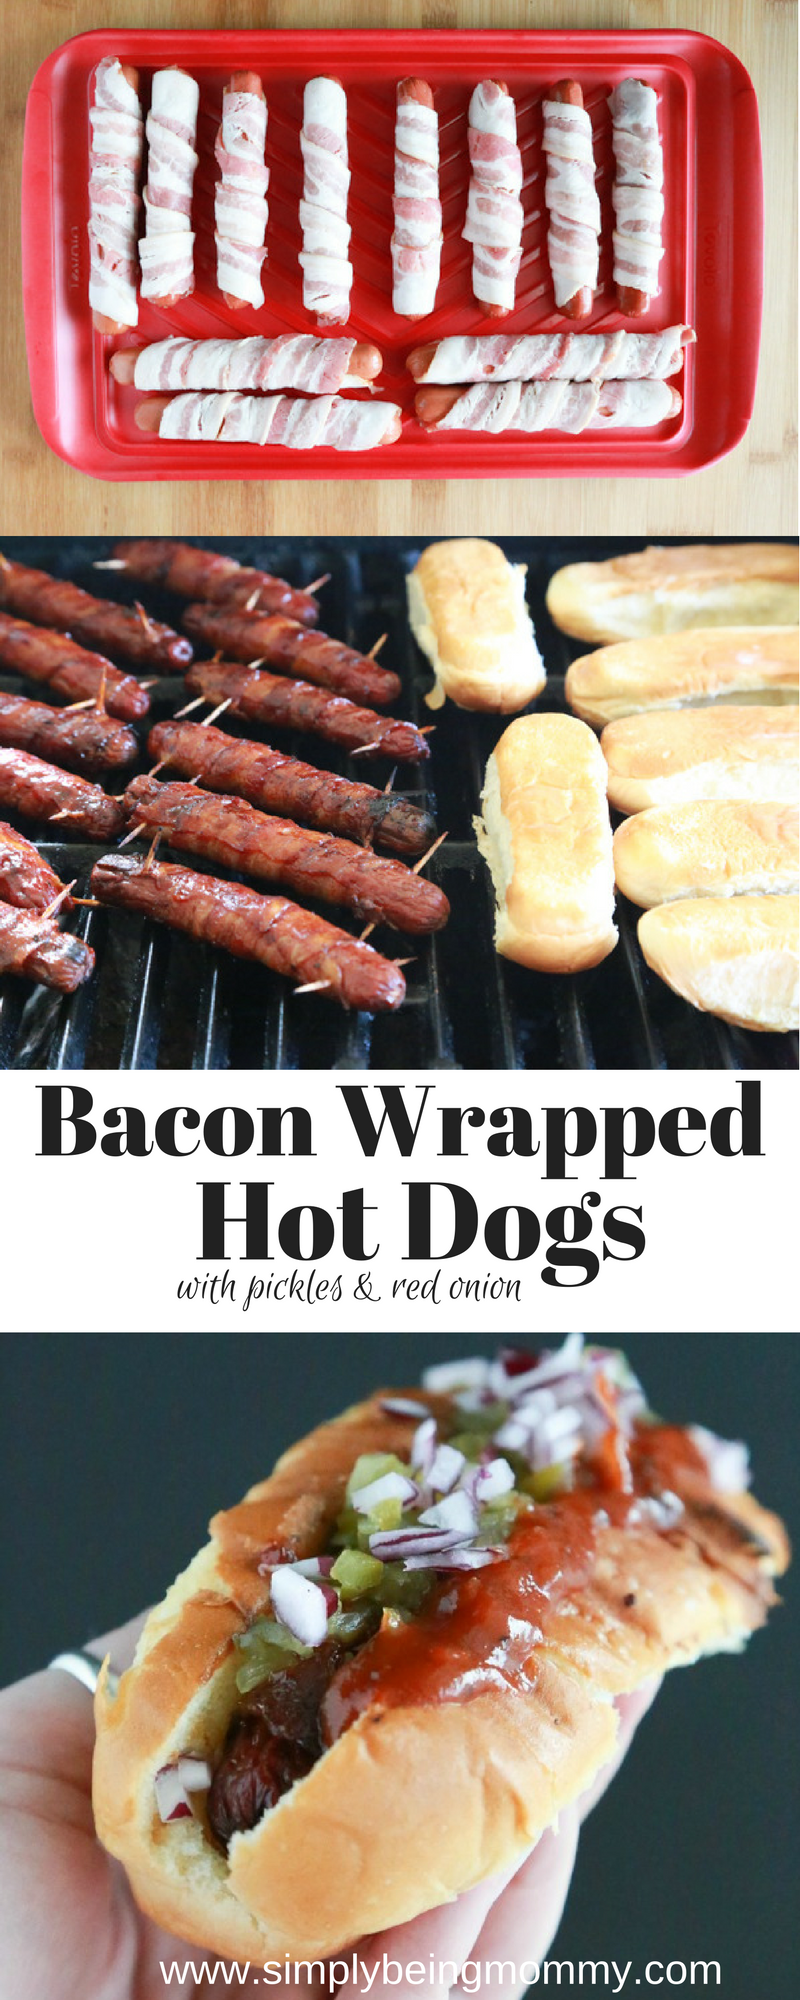 Get ready for your game day parties with these Bacon Wrapped Hot Dogs with pickles and red onion. This ain't your traditional dog recipe!